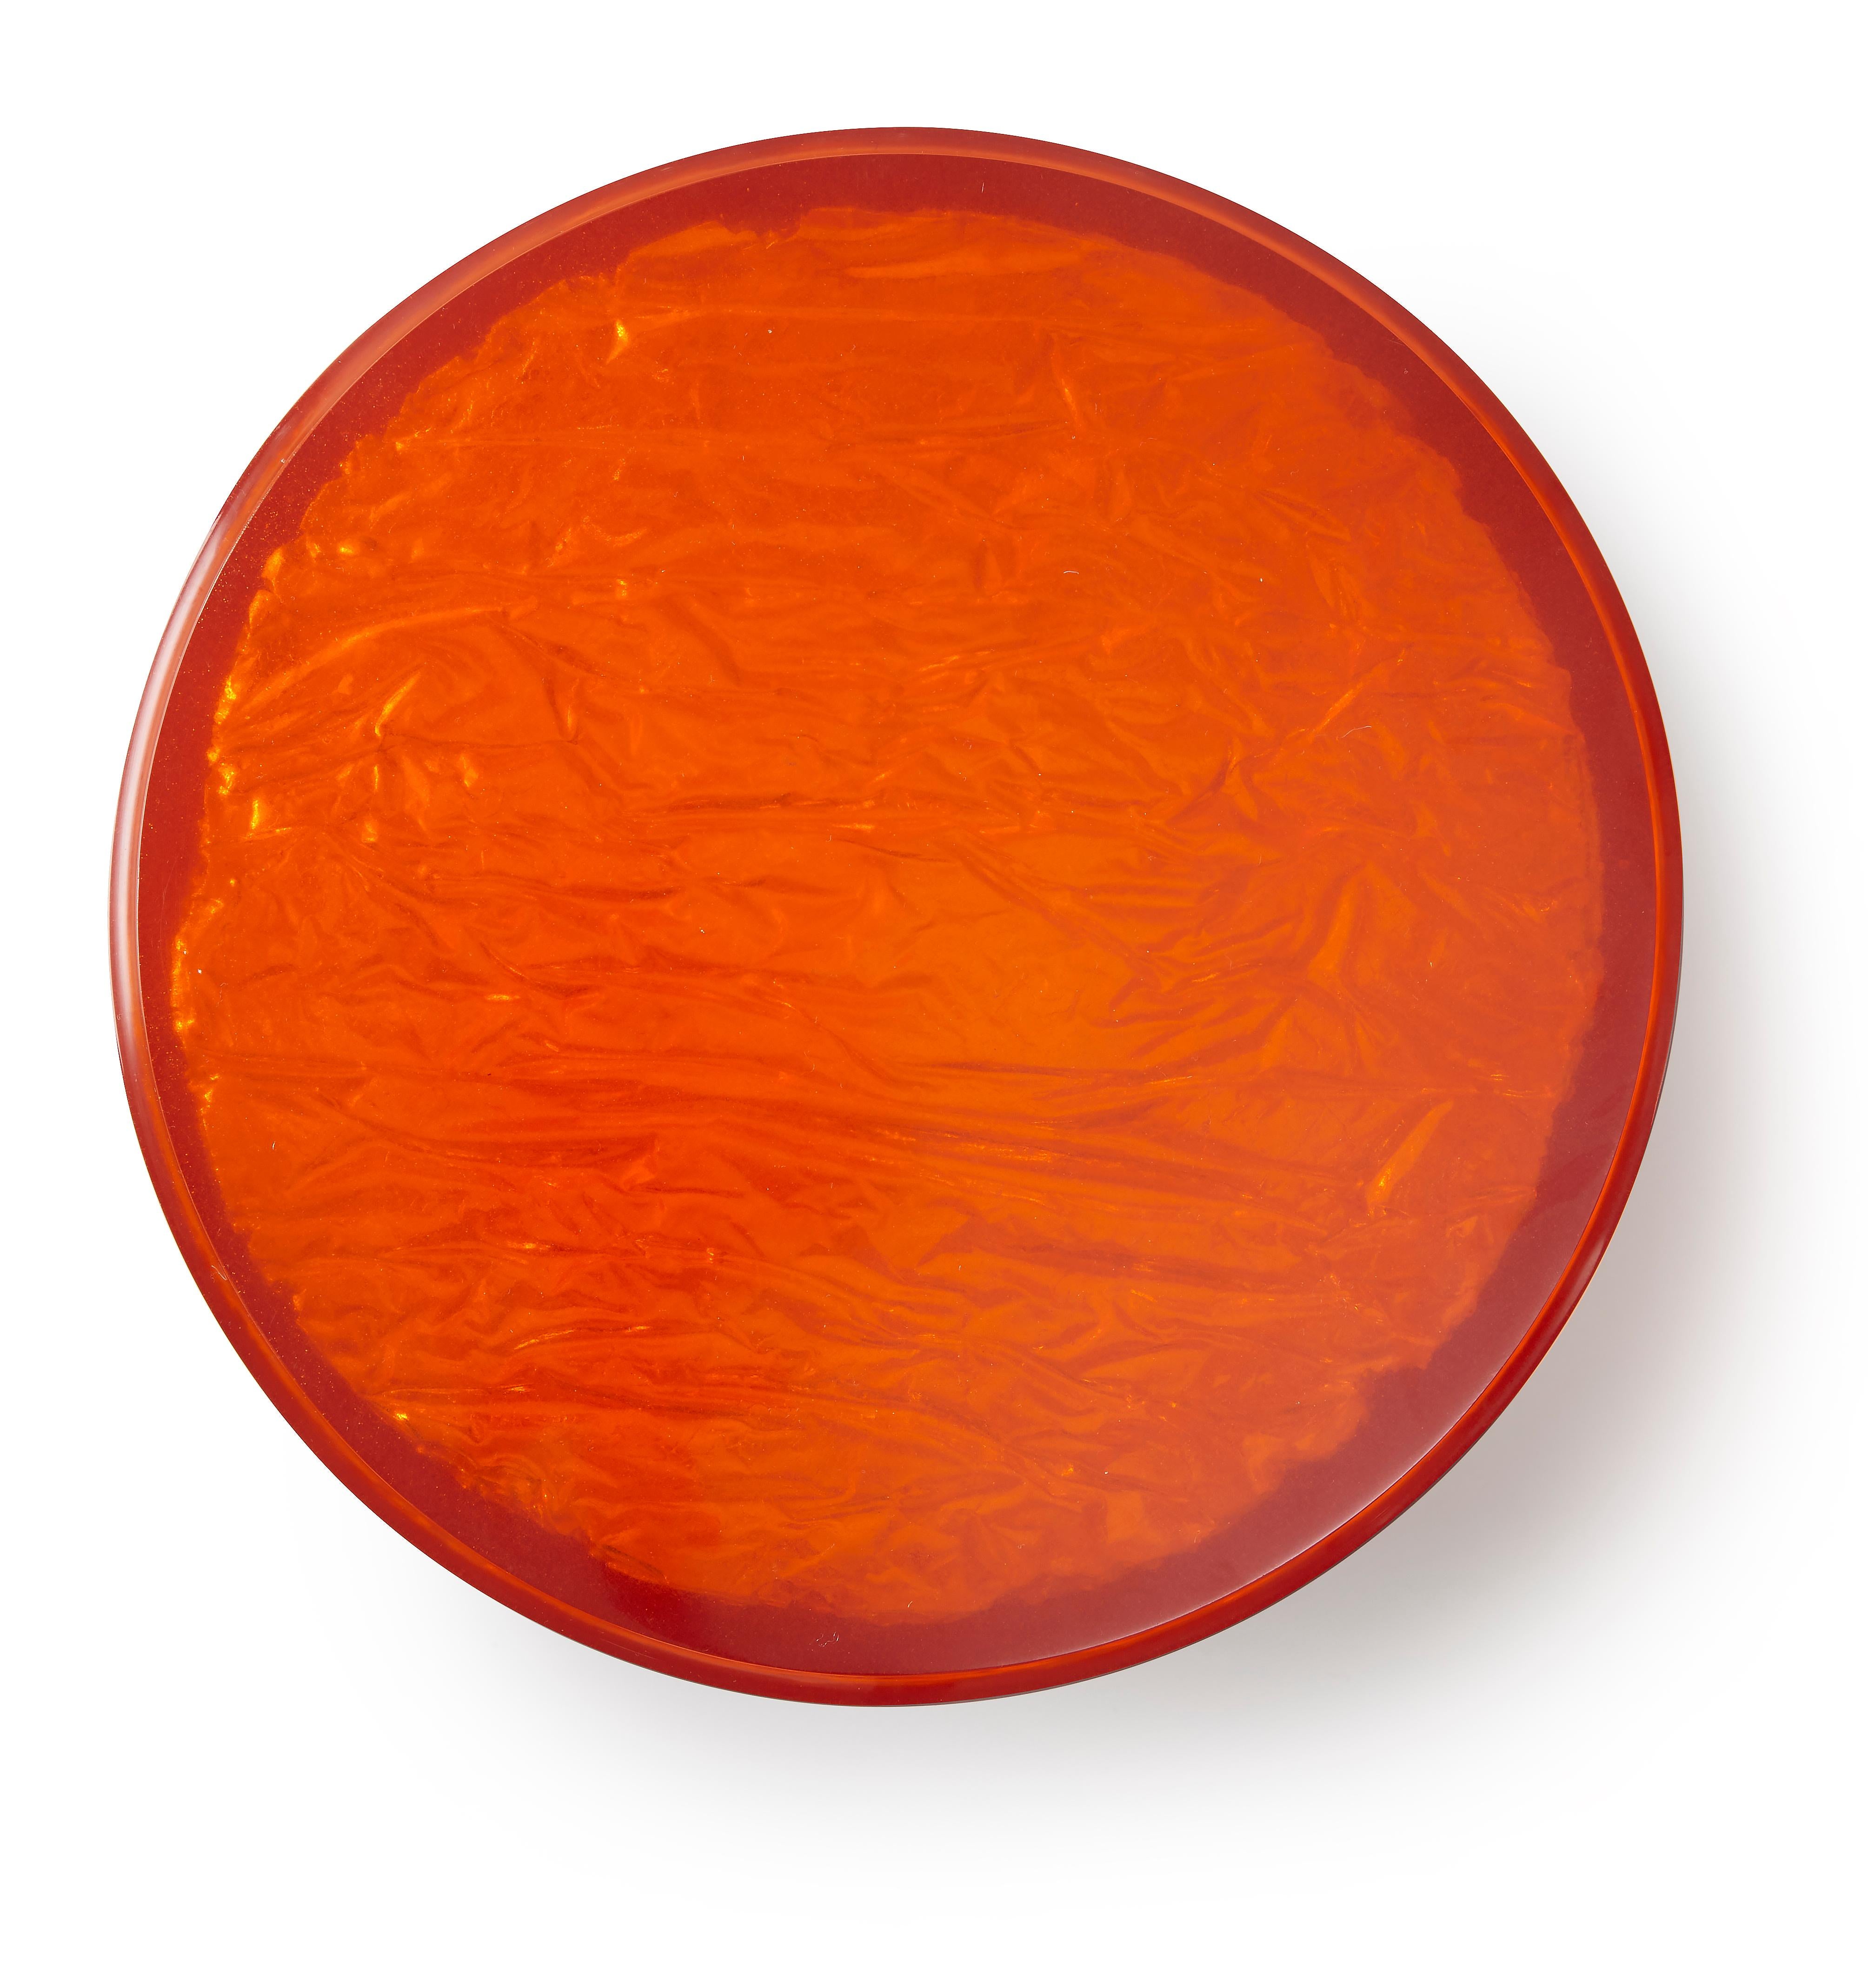 Inspired by the intricate texture of a cherished 1970s lamp, these sculptural tables are made from coloured eco-resin. Resin has many desirable qualities, it is easily mouldable, more pleasing to touch than glass, able to let light pass through it